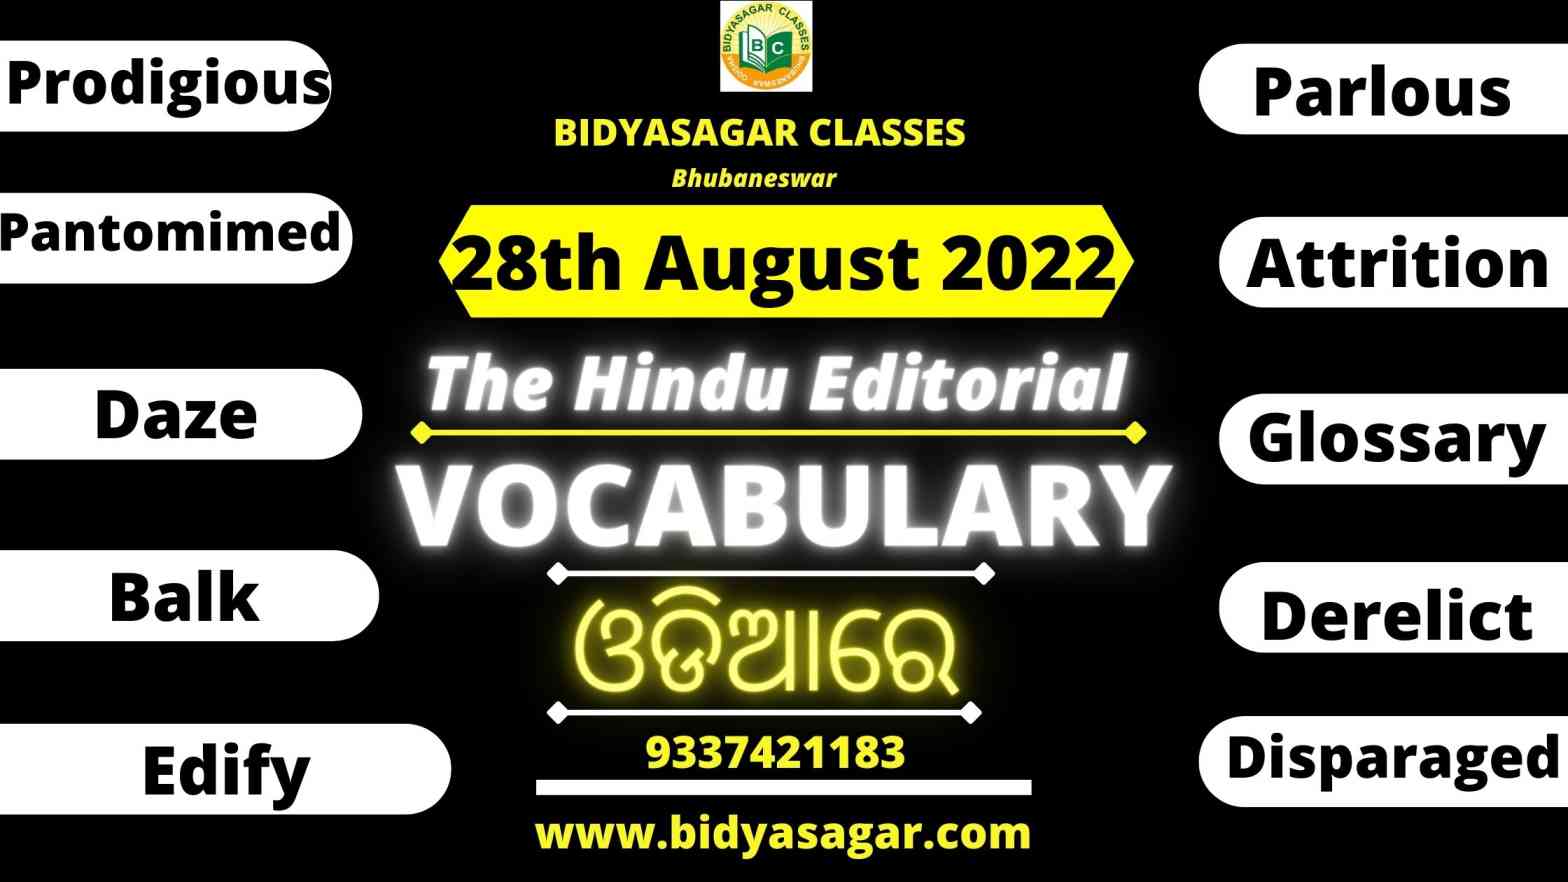 The Hindu Editorial Vocabulary of 28th August 2022